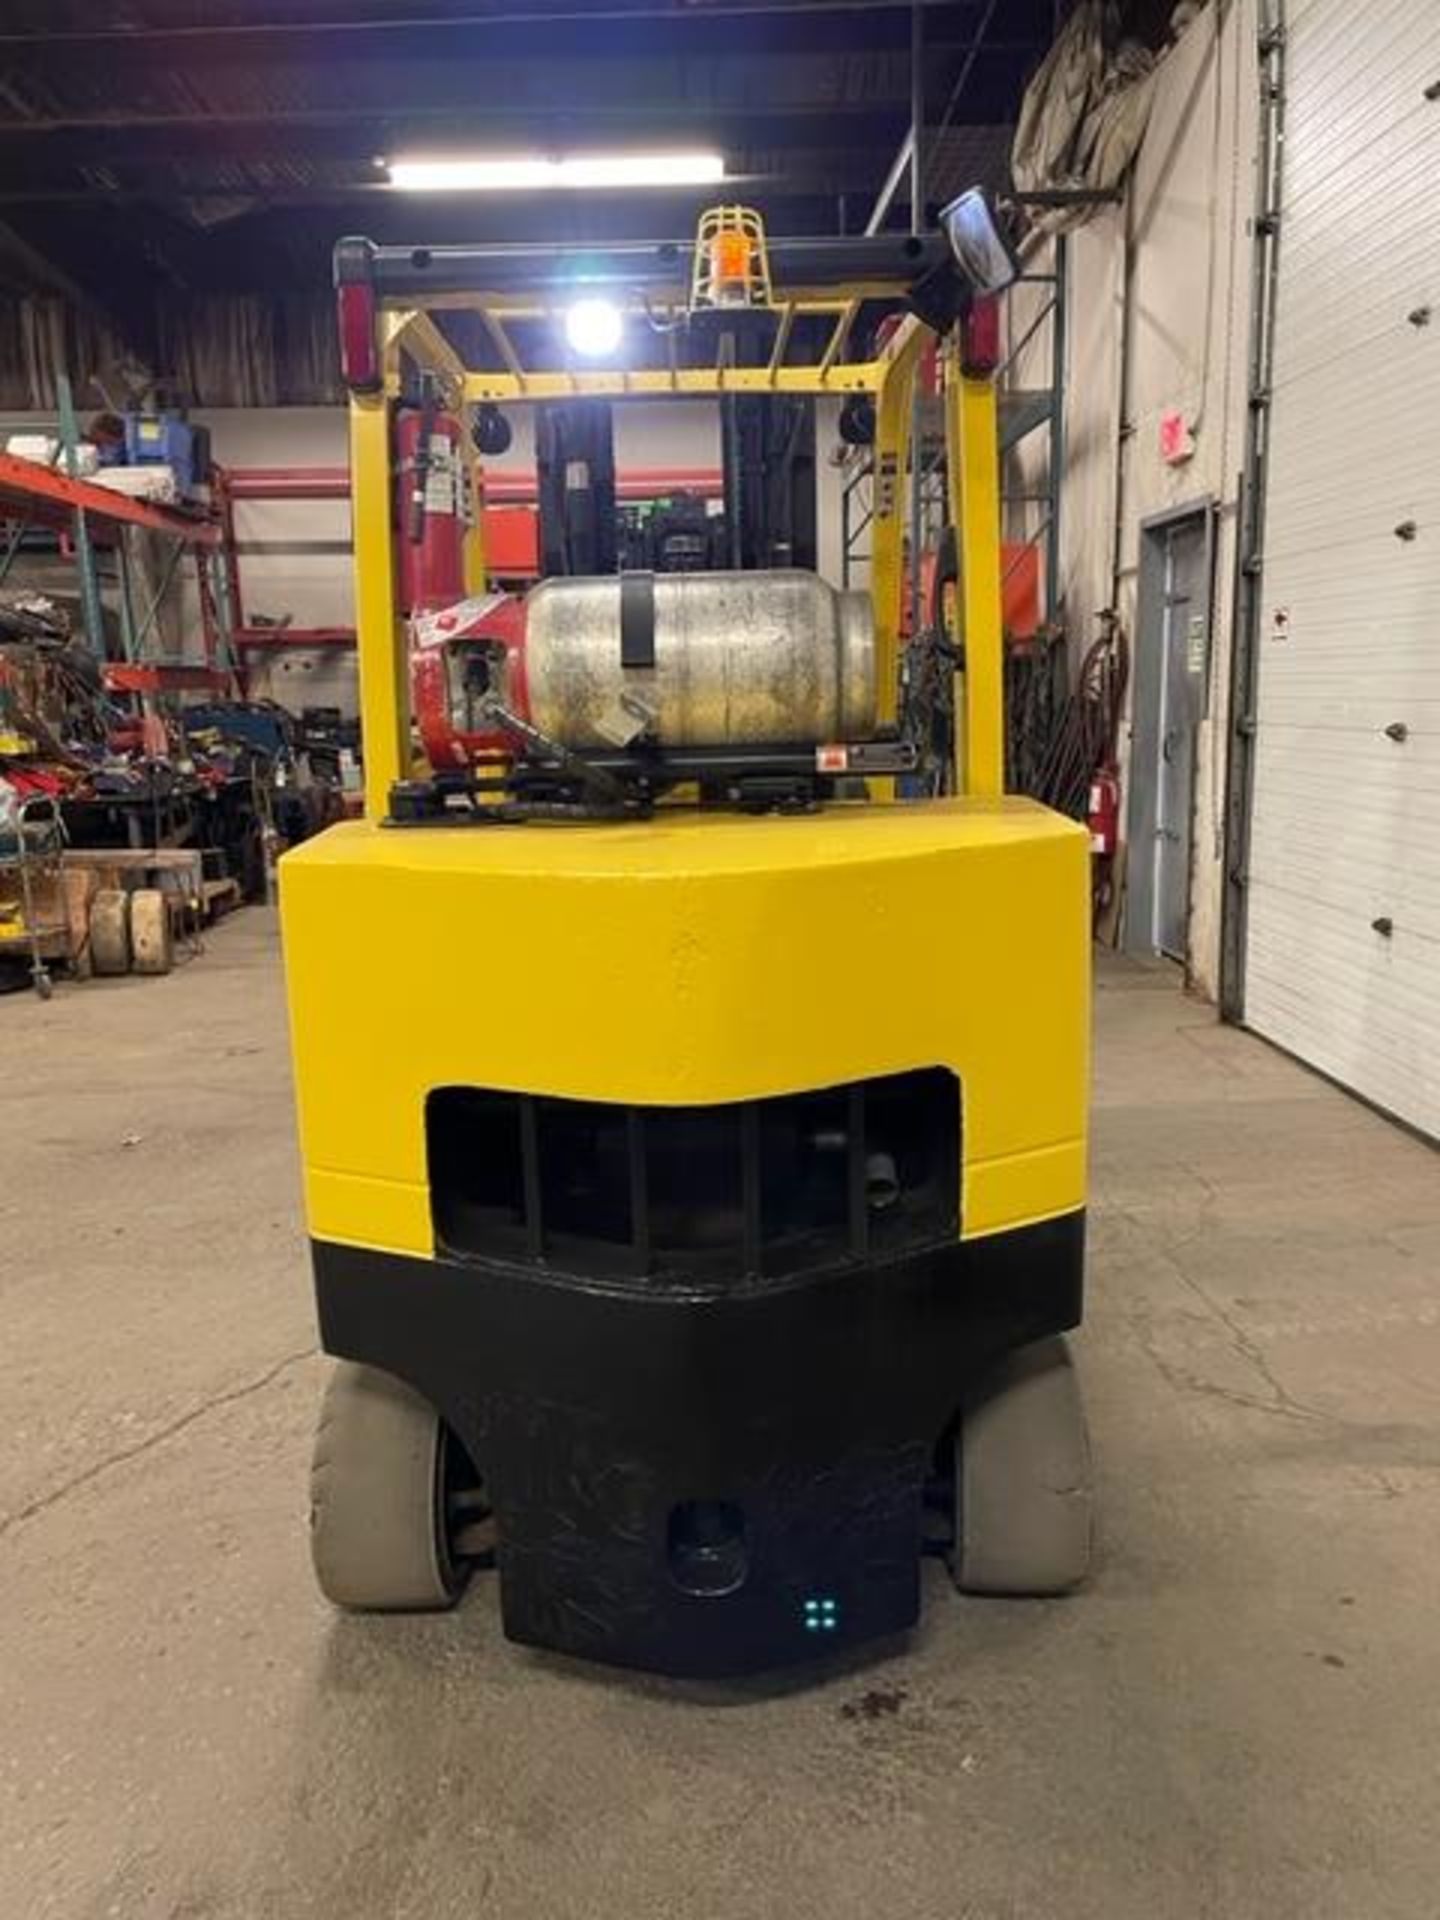 FREE CUSTOMS - MINT 2018 Hyster 12,000lbs Capacity Forklift with sideshift & 3-stage mast & 72" - Image 3 of 3